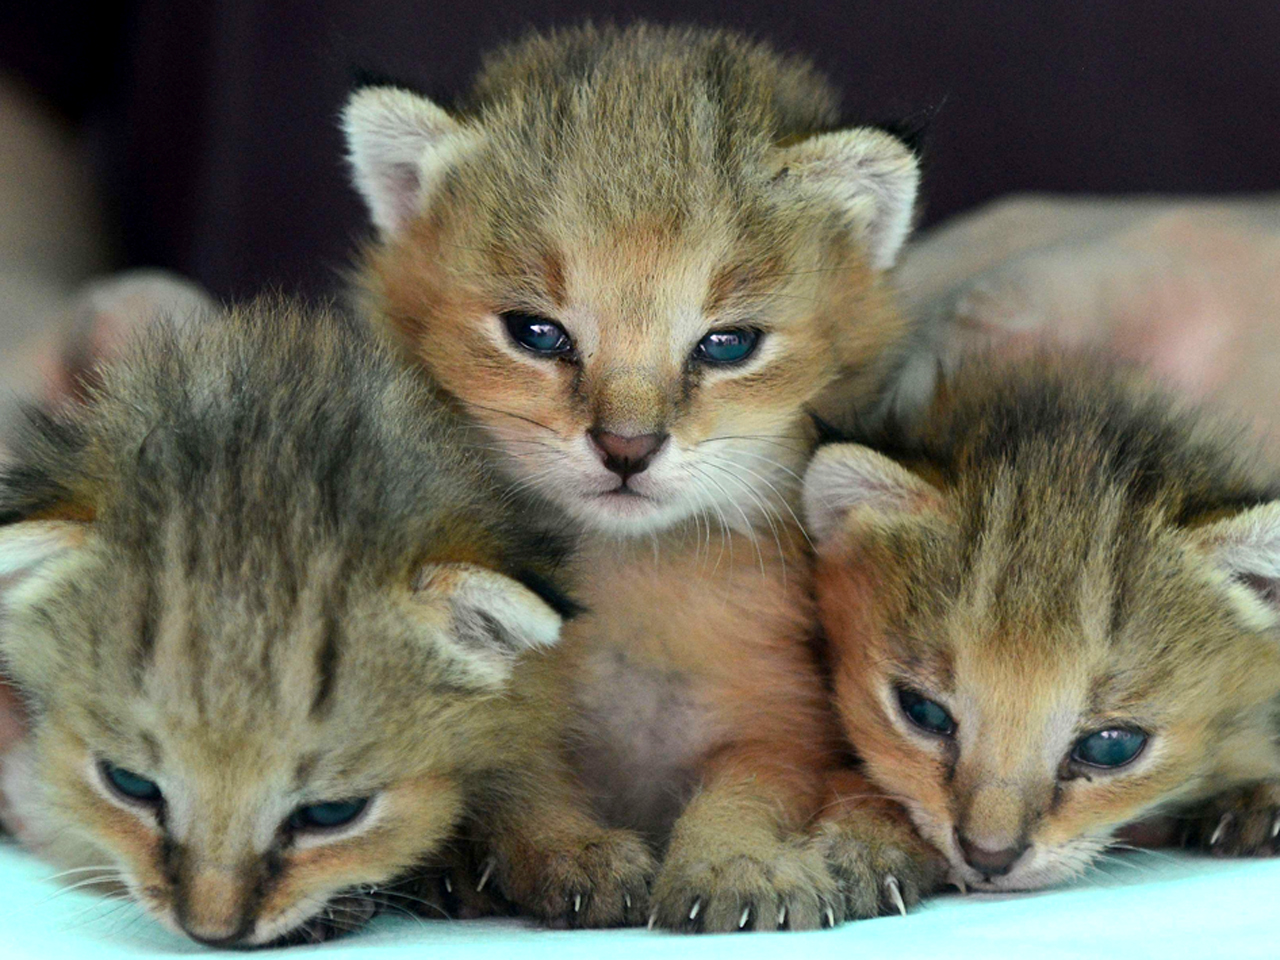 Fuzzy lynx kittens and 27 more amazing animal photos